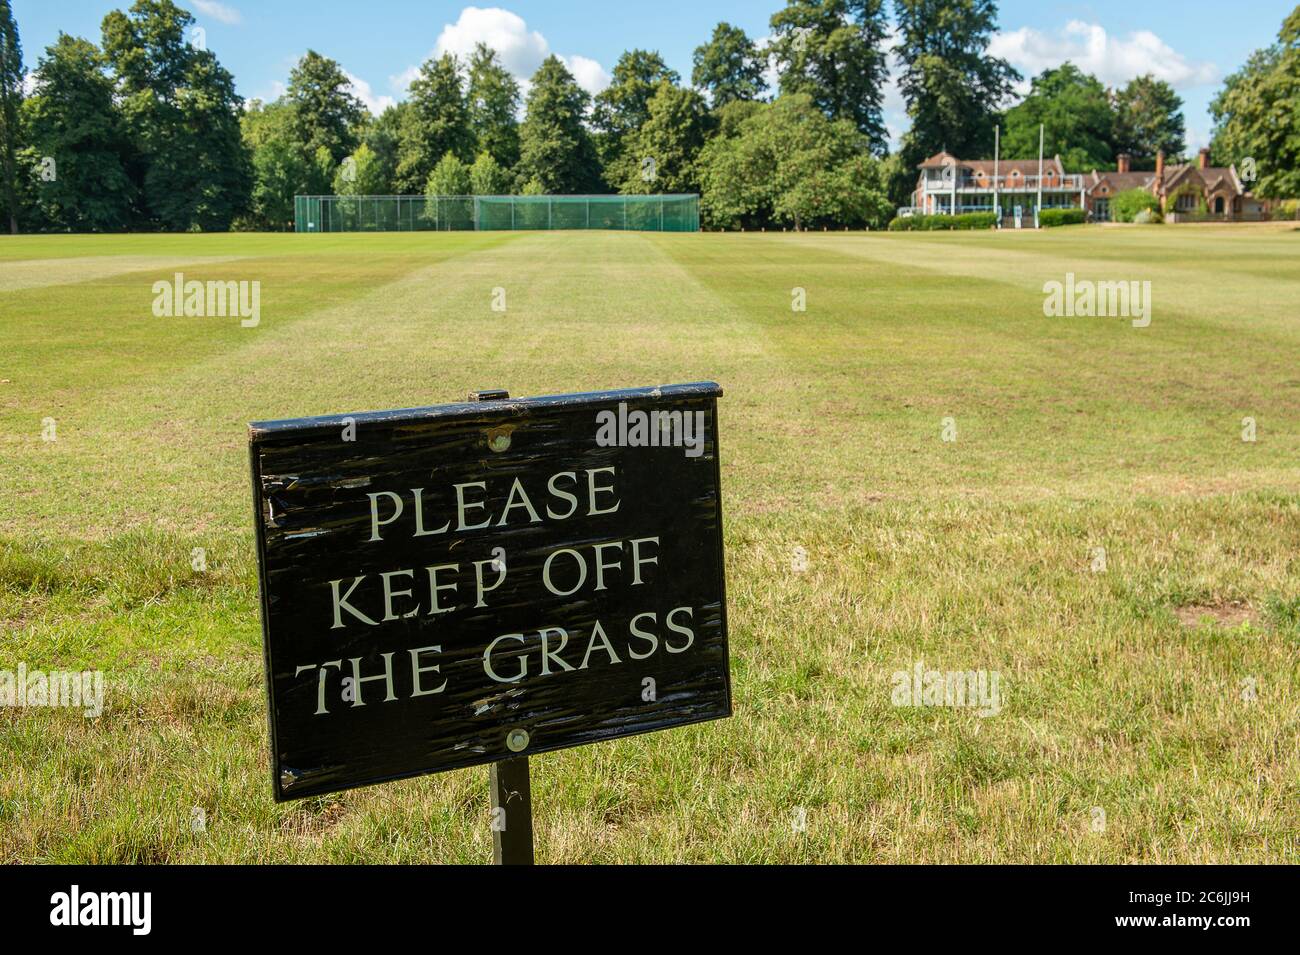 Eton, Windsor, Berkshire, UK. 10th July, 2020. The cricket grounds at the Upper Club at Eton College are being prepared for cricket to restart. Recreational cricket will be allowed to start again from tomorrow 11th July 2020 in England following the Government's announcement on the easing of the Coronavirus Covid-19 lockdown rules. Credit: Maureen McLean/Alamy Live News Stock Photo